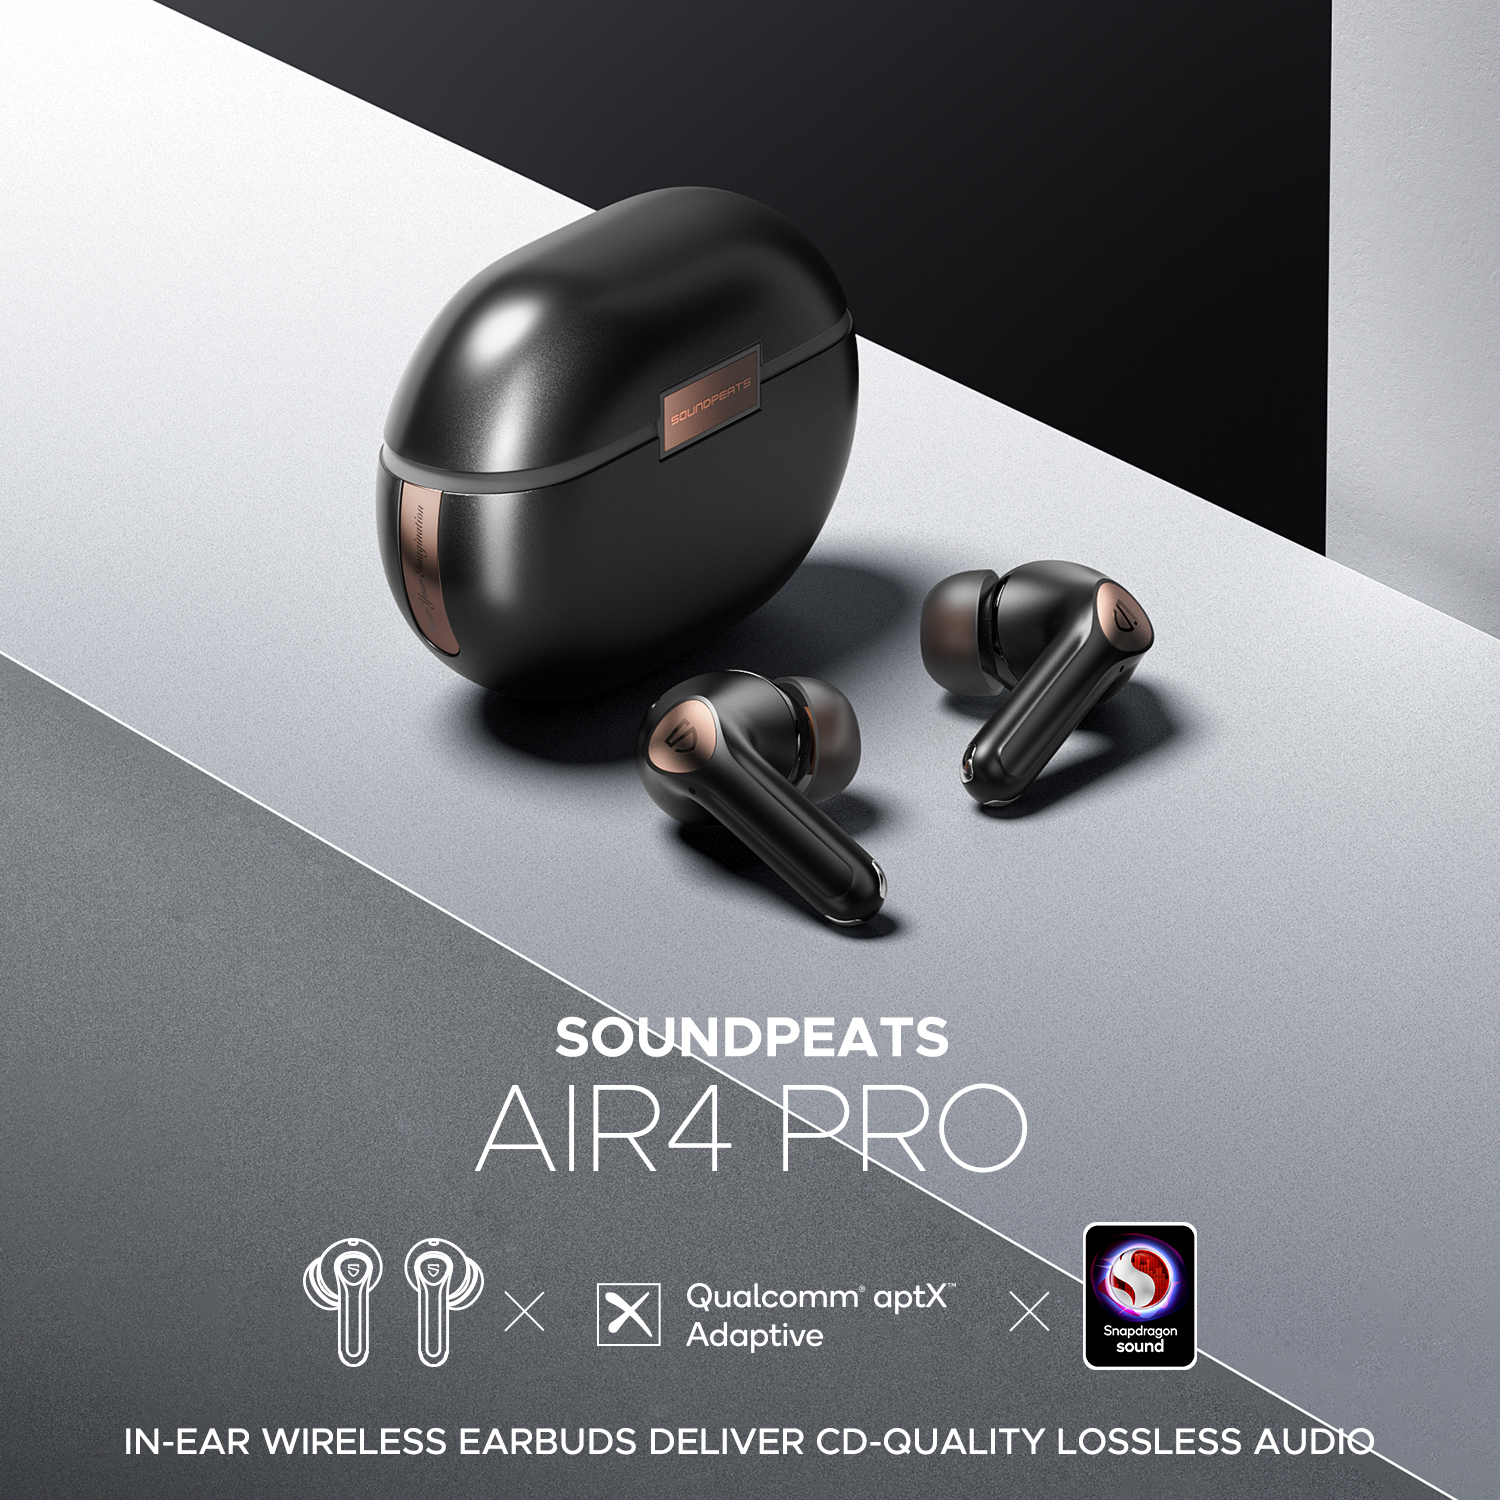 SOUNDPEATS on X: NEW! Introducing SOUNDPEATS Air4 Pro In-Ear Wireless  Earbuds Deliver CD-Quality Lossless Audio #soundpeats #air4pro #wireless  #earbuds #TWS #music #audio #technology #tech #ANC #newupdate #newrelease  #explore  / X